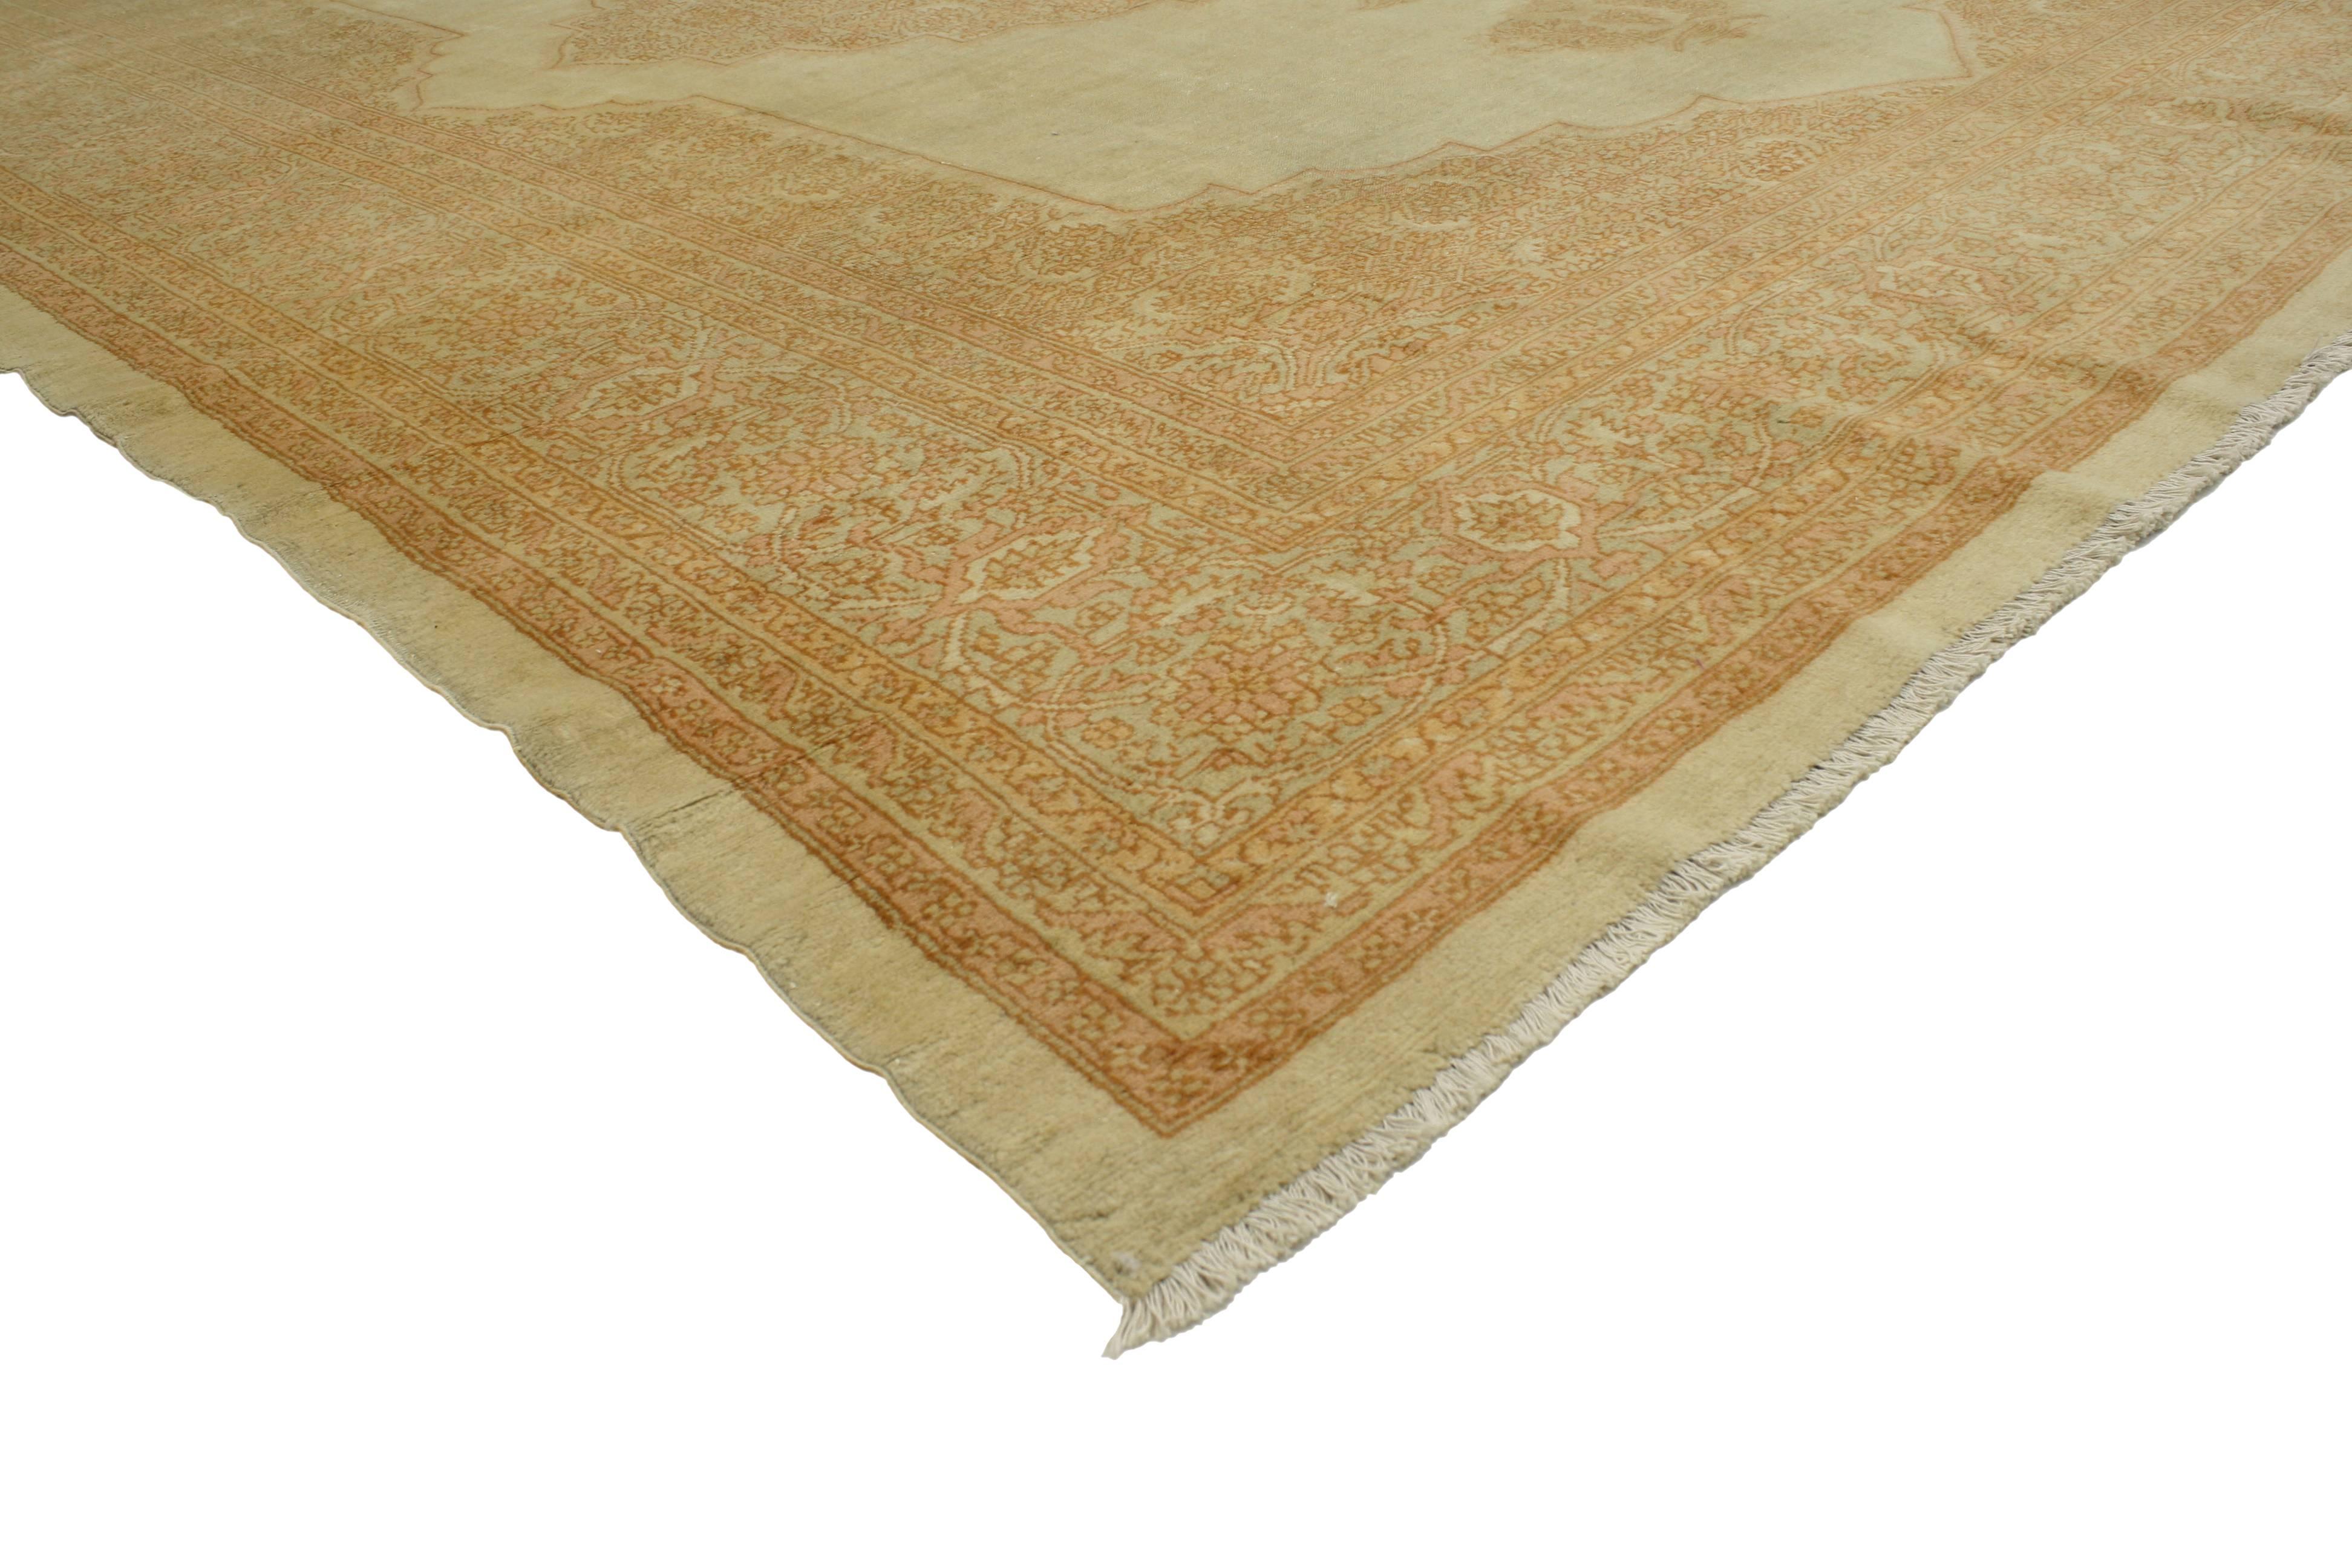 76885 Antique Turkish Oushak Palace Rug with English Country Cottage Style 11'03 x 14'05. Balancing a timeless botanical design with a romantic rustic sensibility, this hand knotted wool antique Turkish Oushak palace rug beautifully embodies English